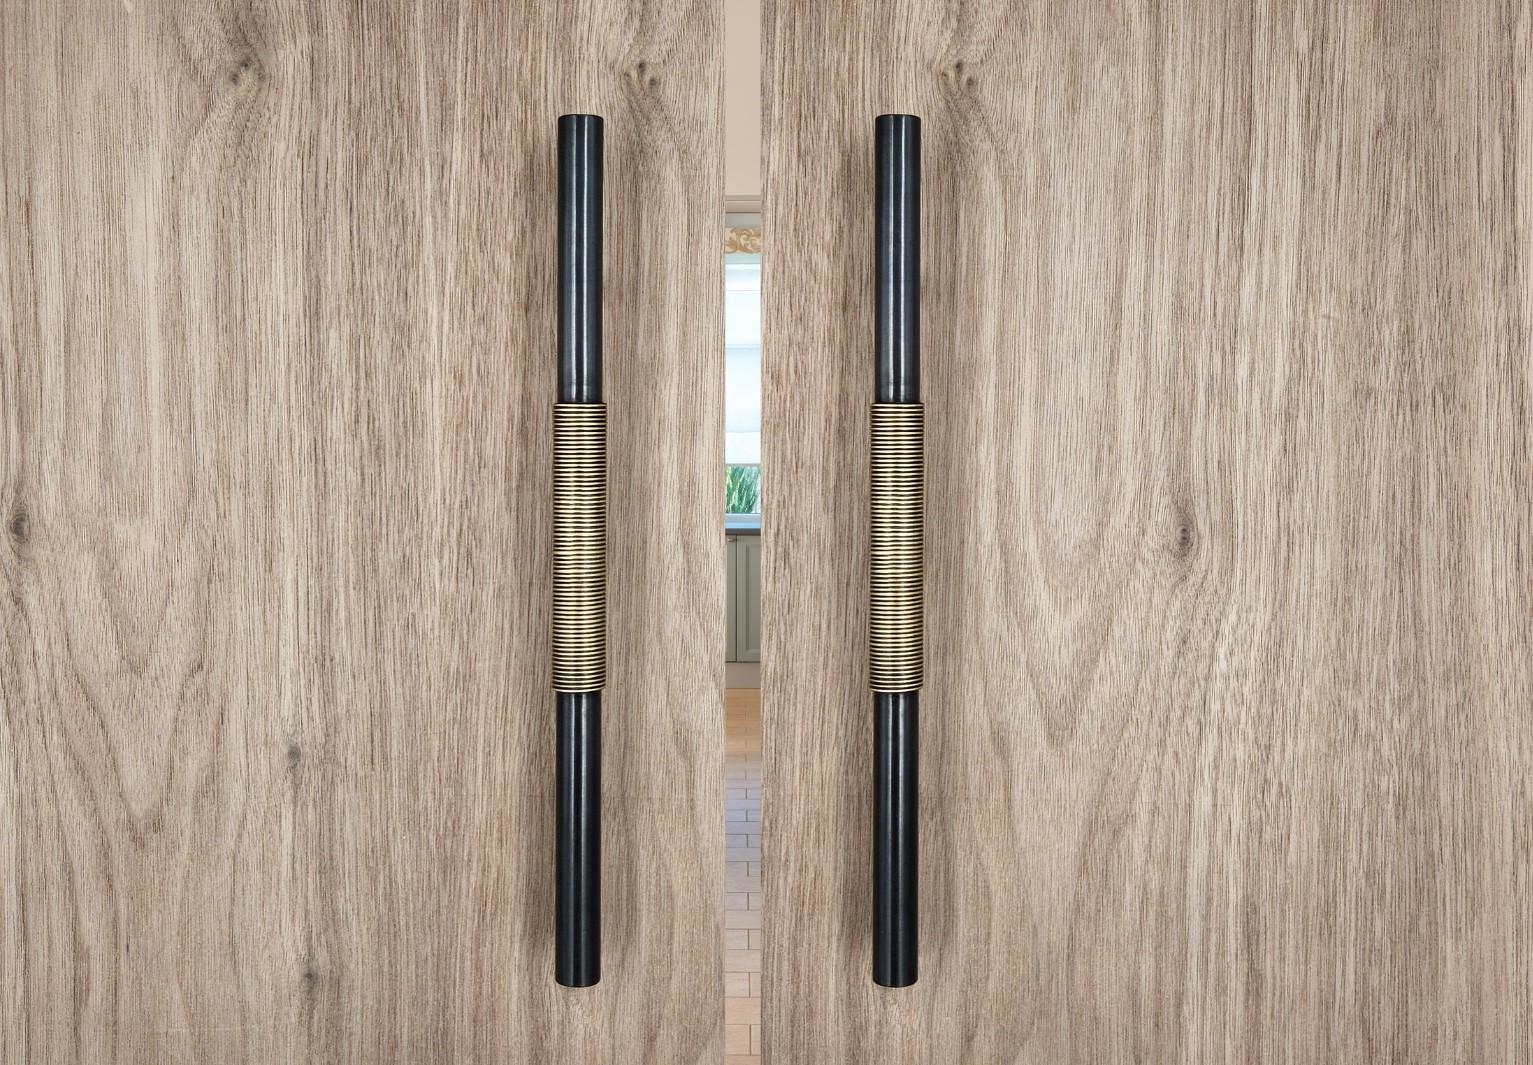 Solid brass pull handle with an oriental touch. Available in different sizes: 30 cm & 70 cm
Fixture option available : facade fixing.